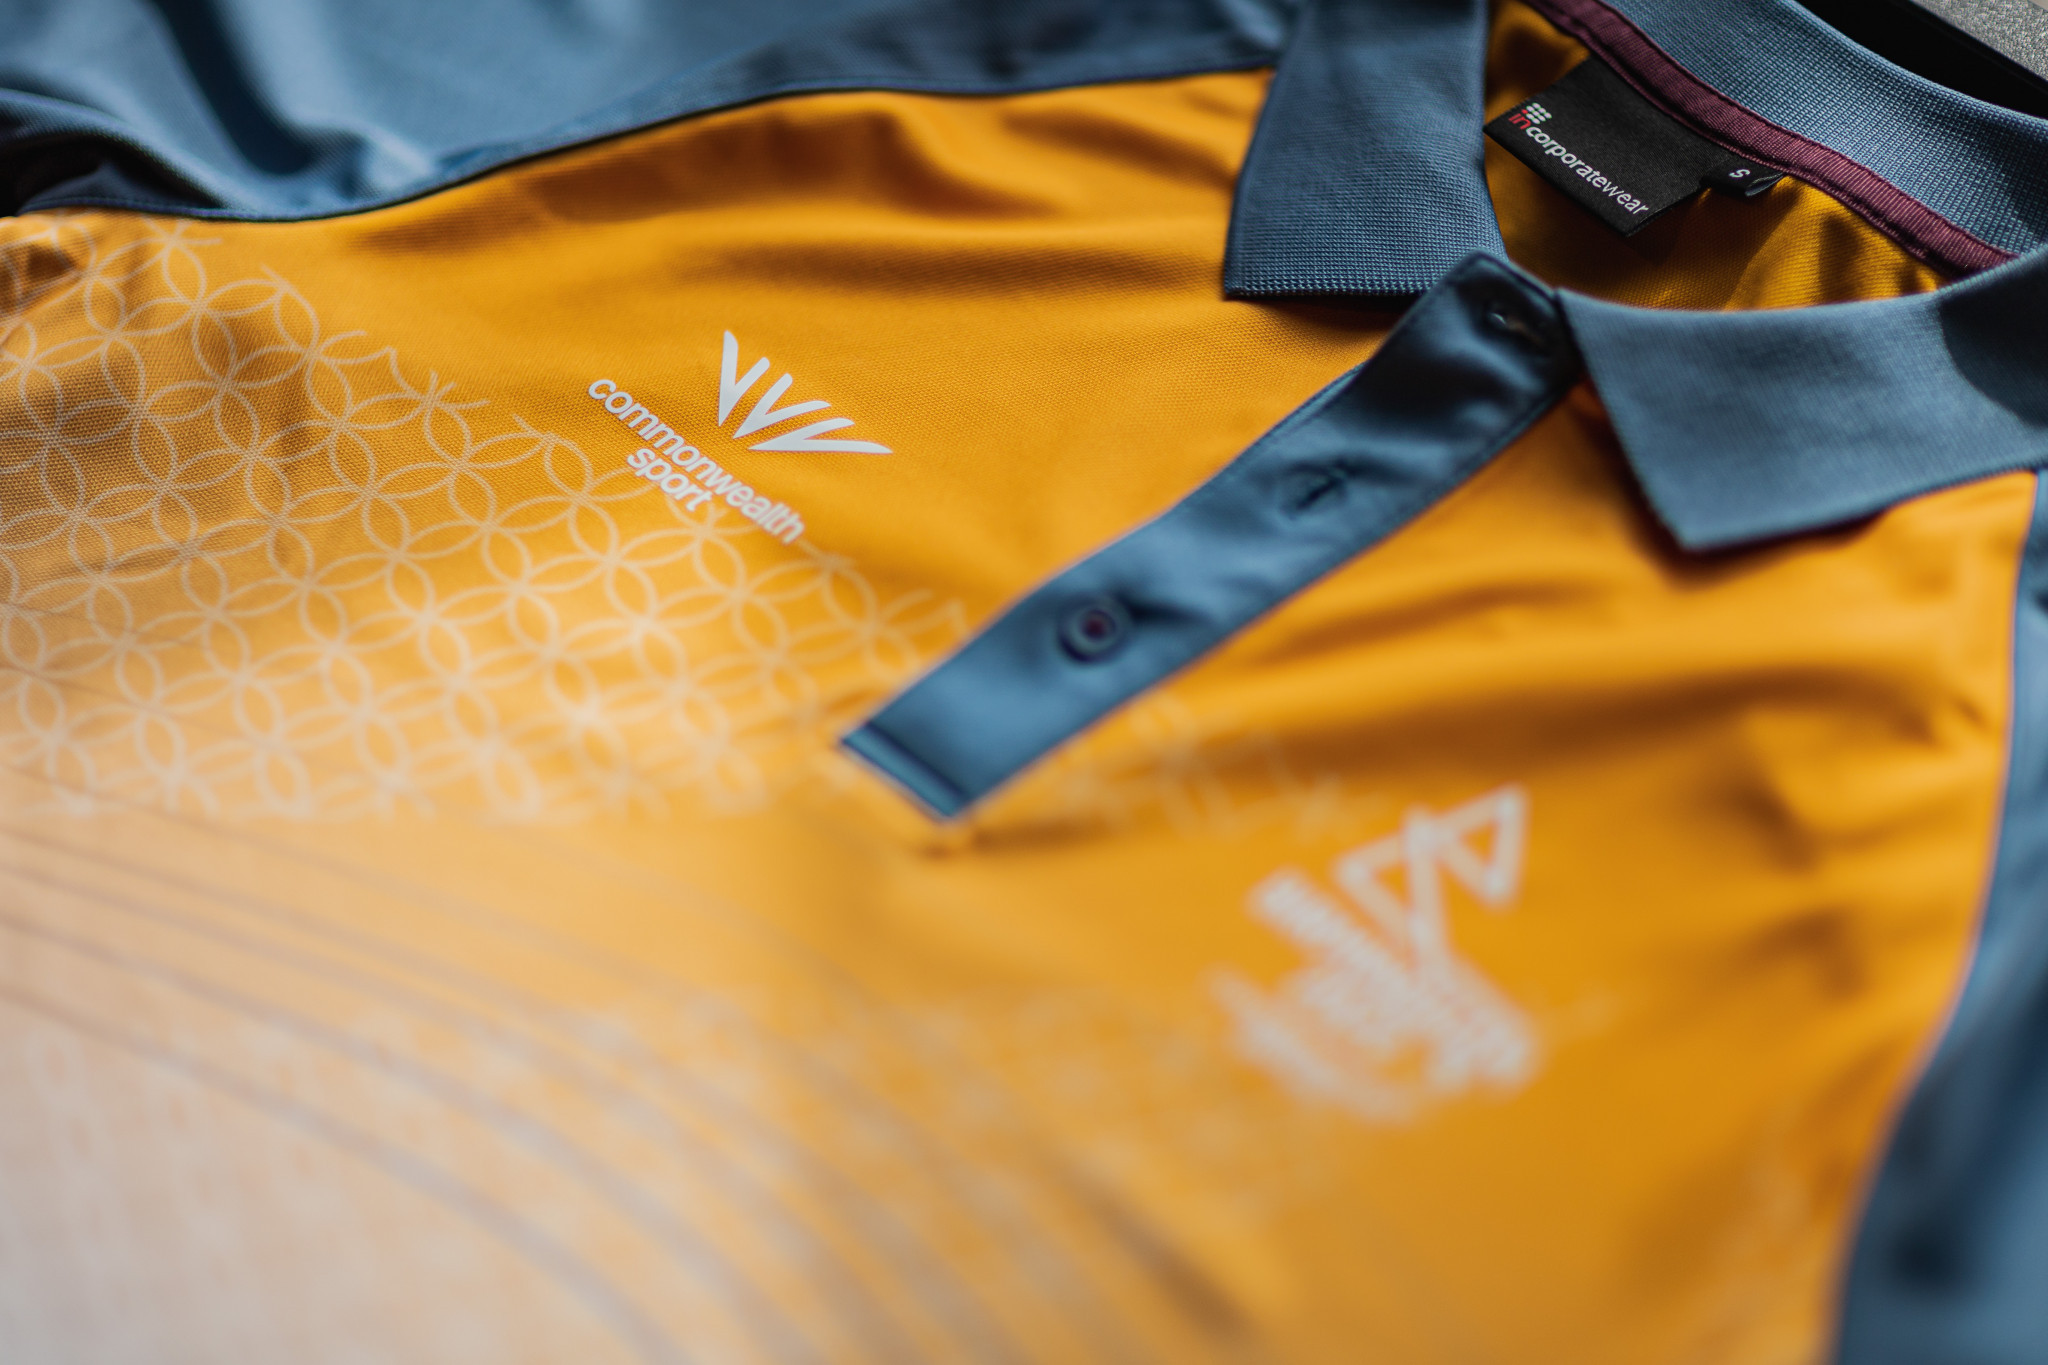 The uniforms pay tribute to architecture in Birmingham with details from different buildings in the city, such as the rings visible on the polo shirt which are inspired by the Library of Birmingham ©Birmingham 2022